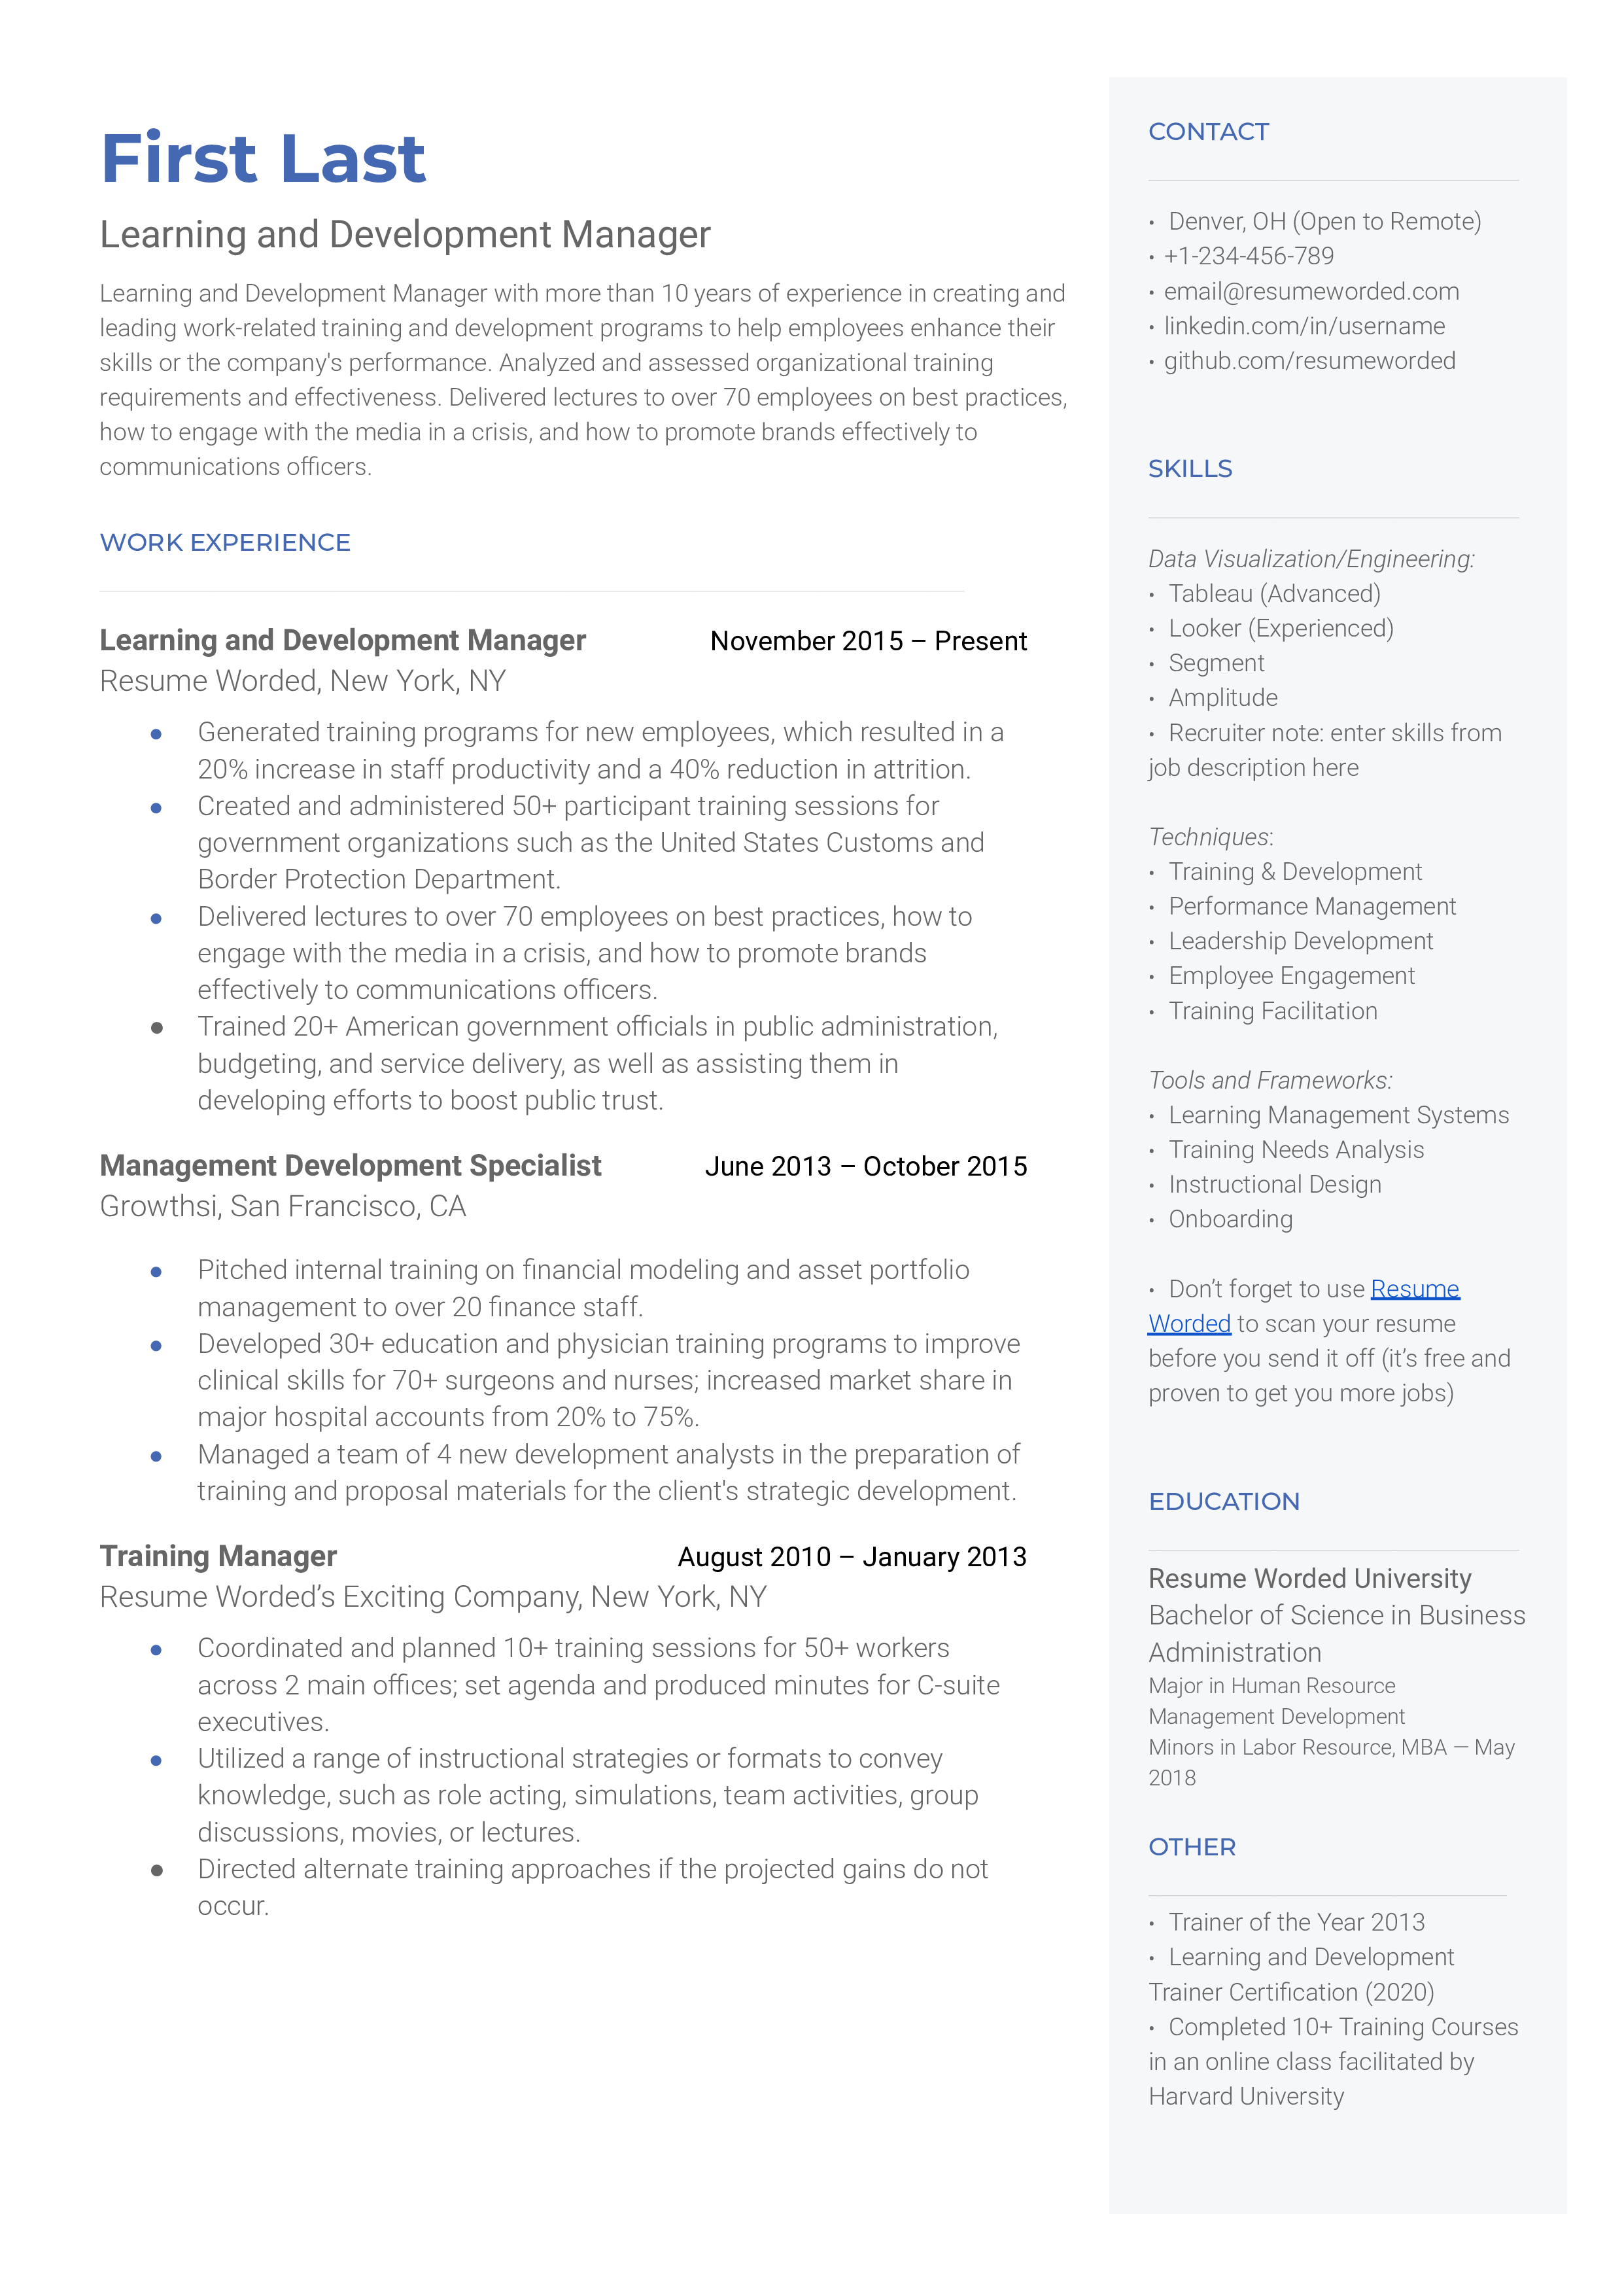 A Learning And Development Manager resume template for 2023 shows what a successful resume looks like to land a job